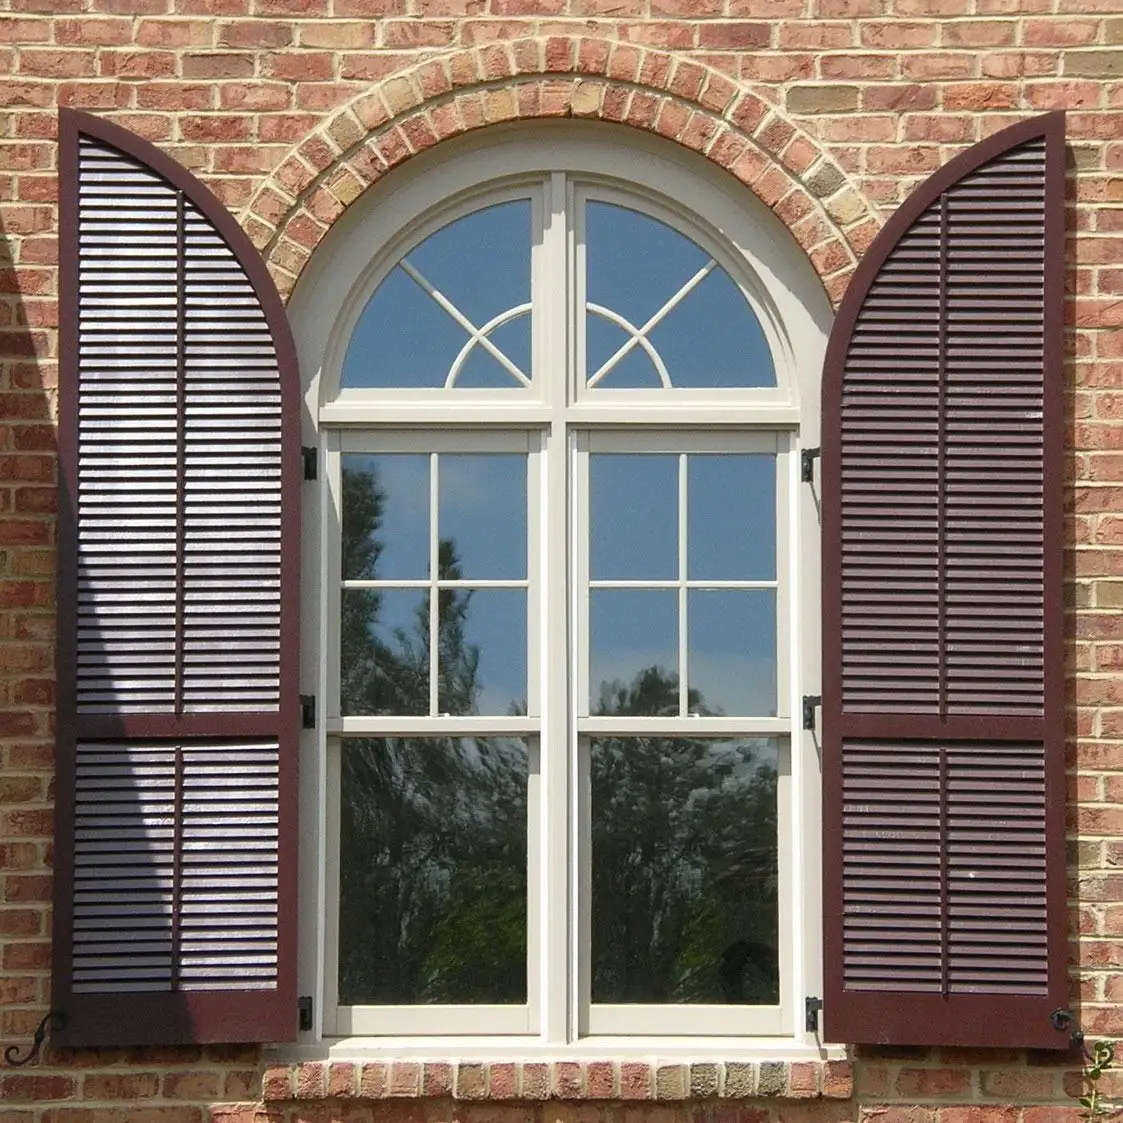 Exterior shutters for arched windows